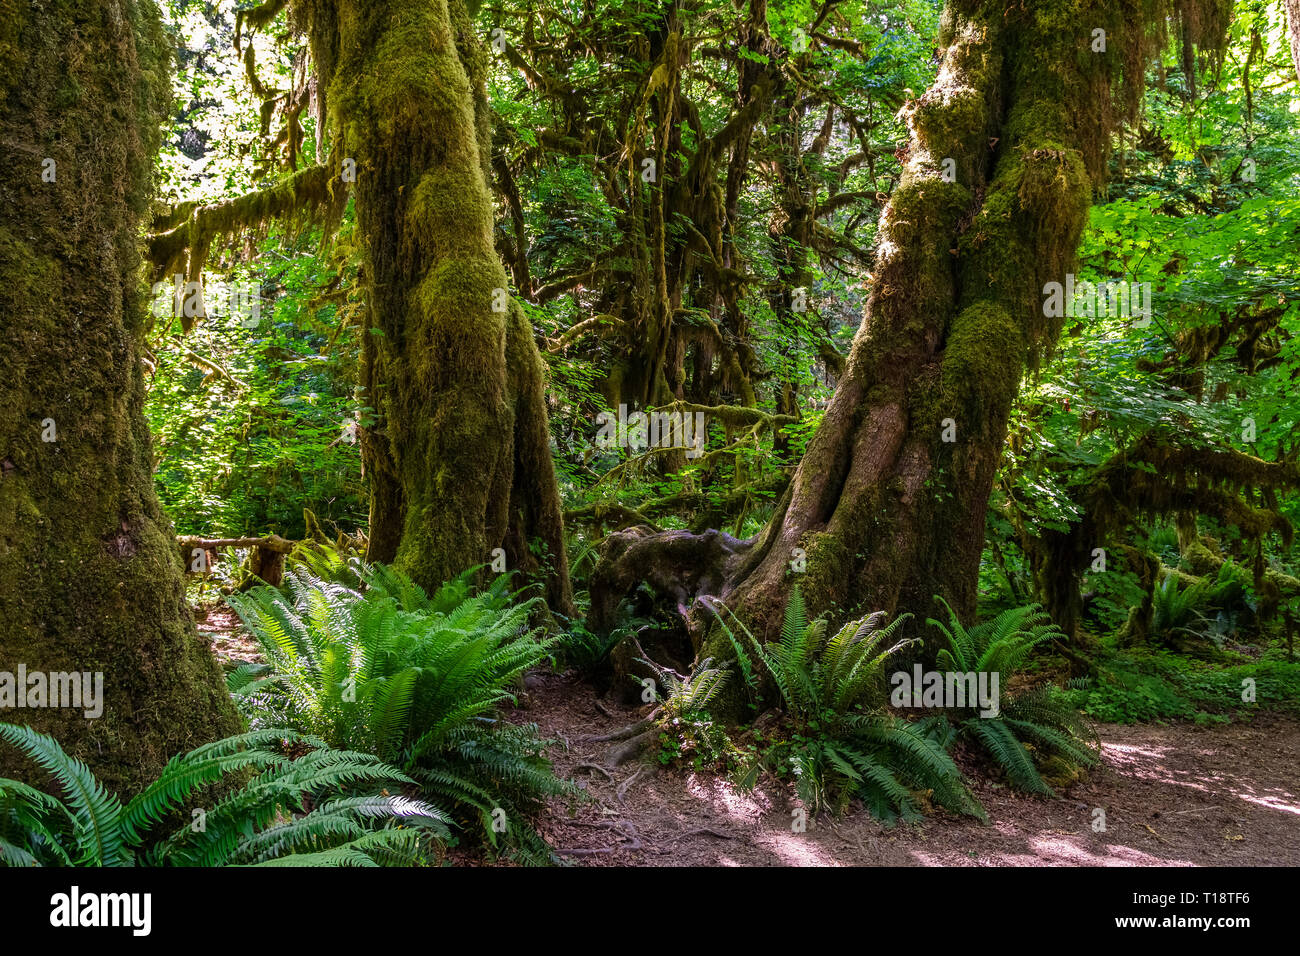 Trees with moss, sword ferns and lush vegetation in Hoh Forest, Olympic National Park, Washington state, USA. Stock Photo